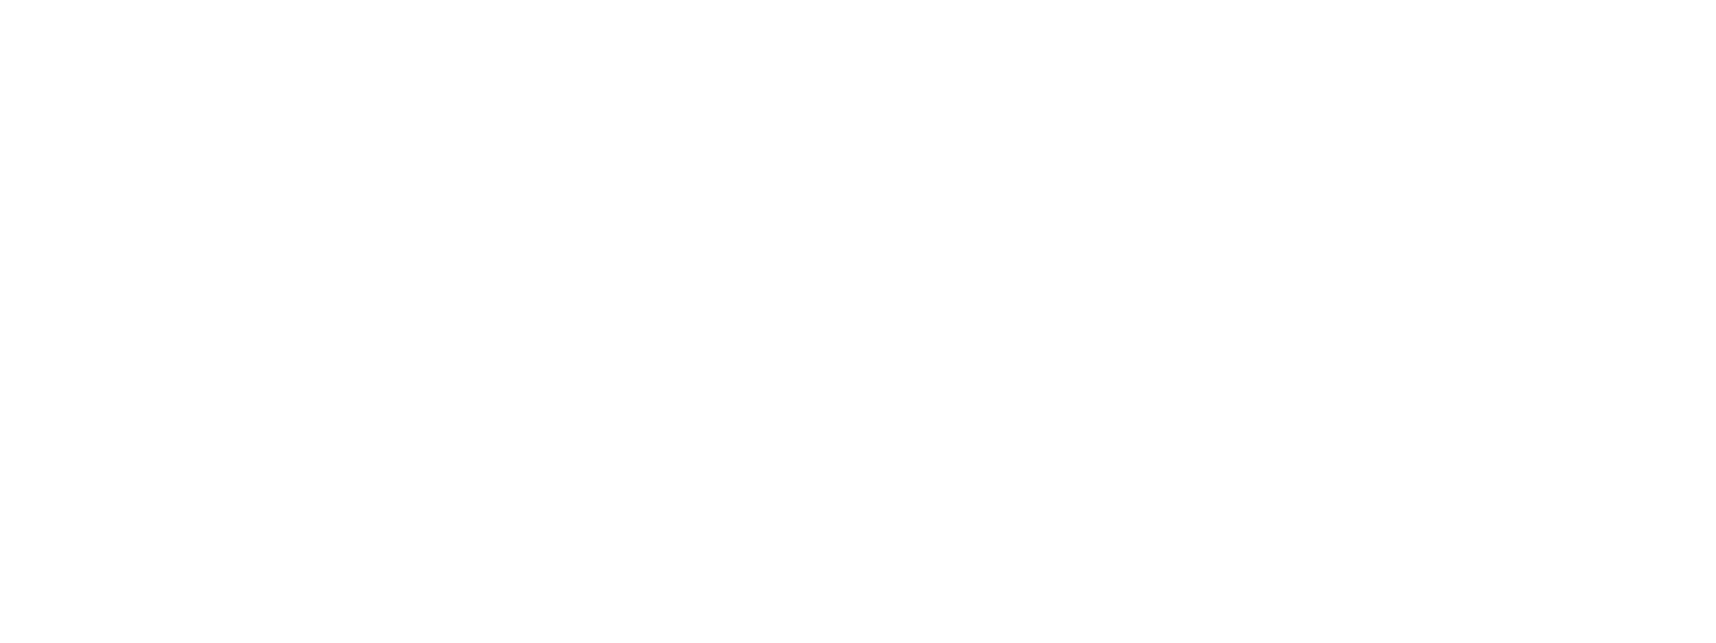 Institute of National Remembrance